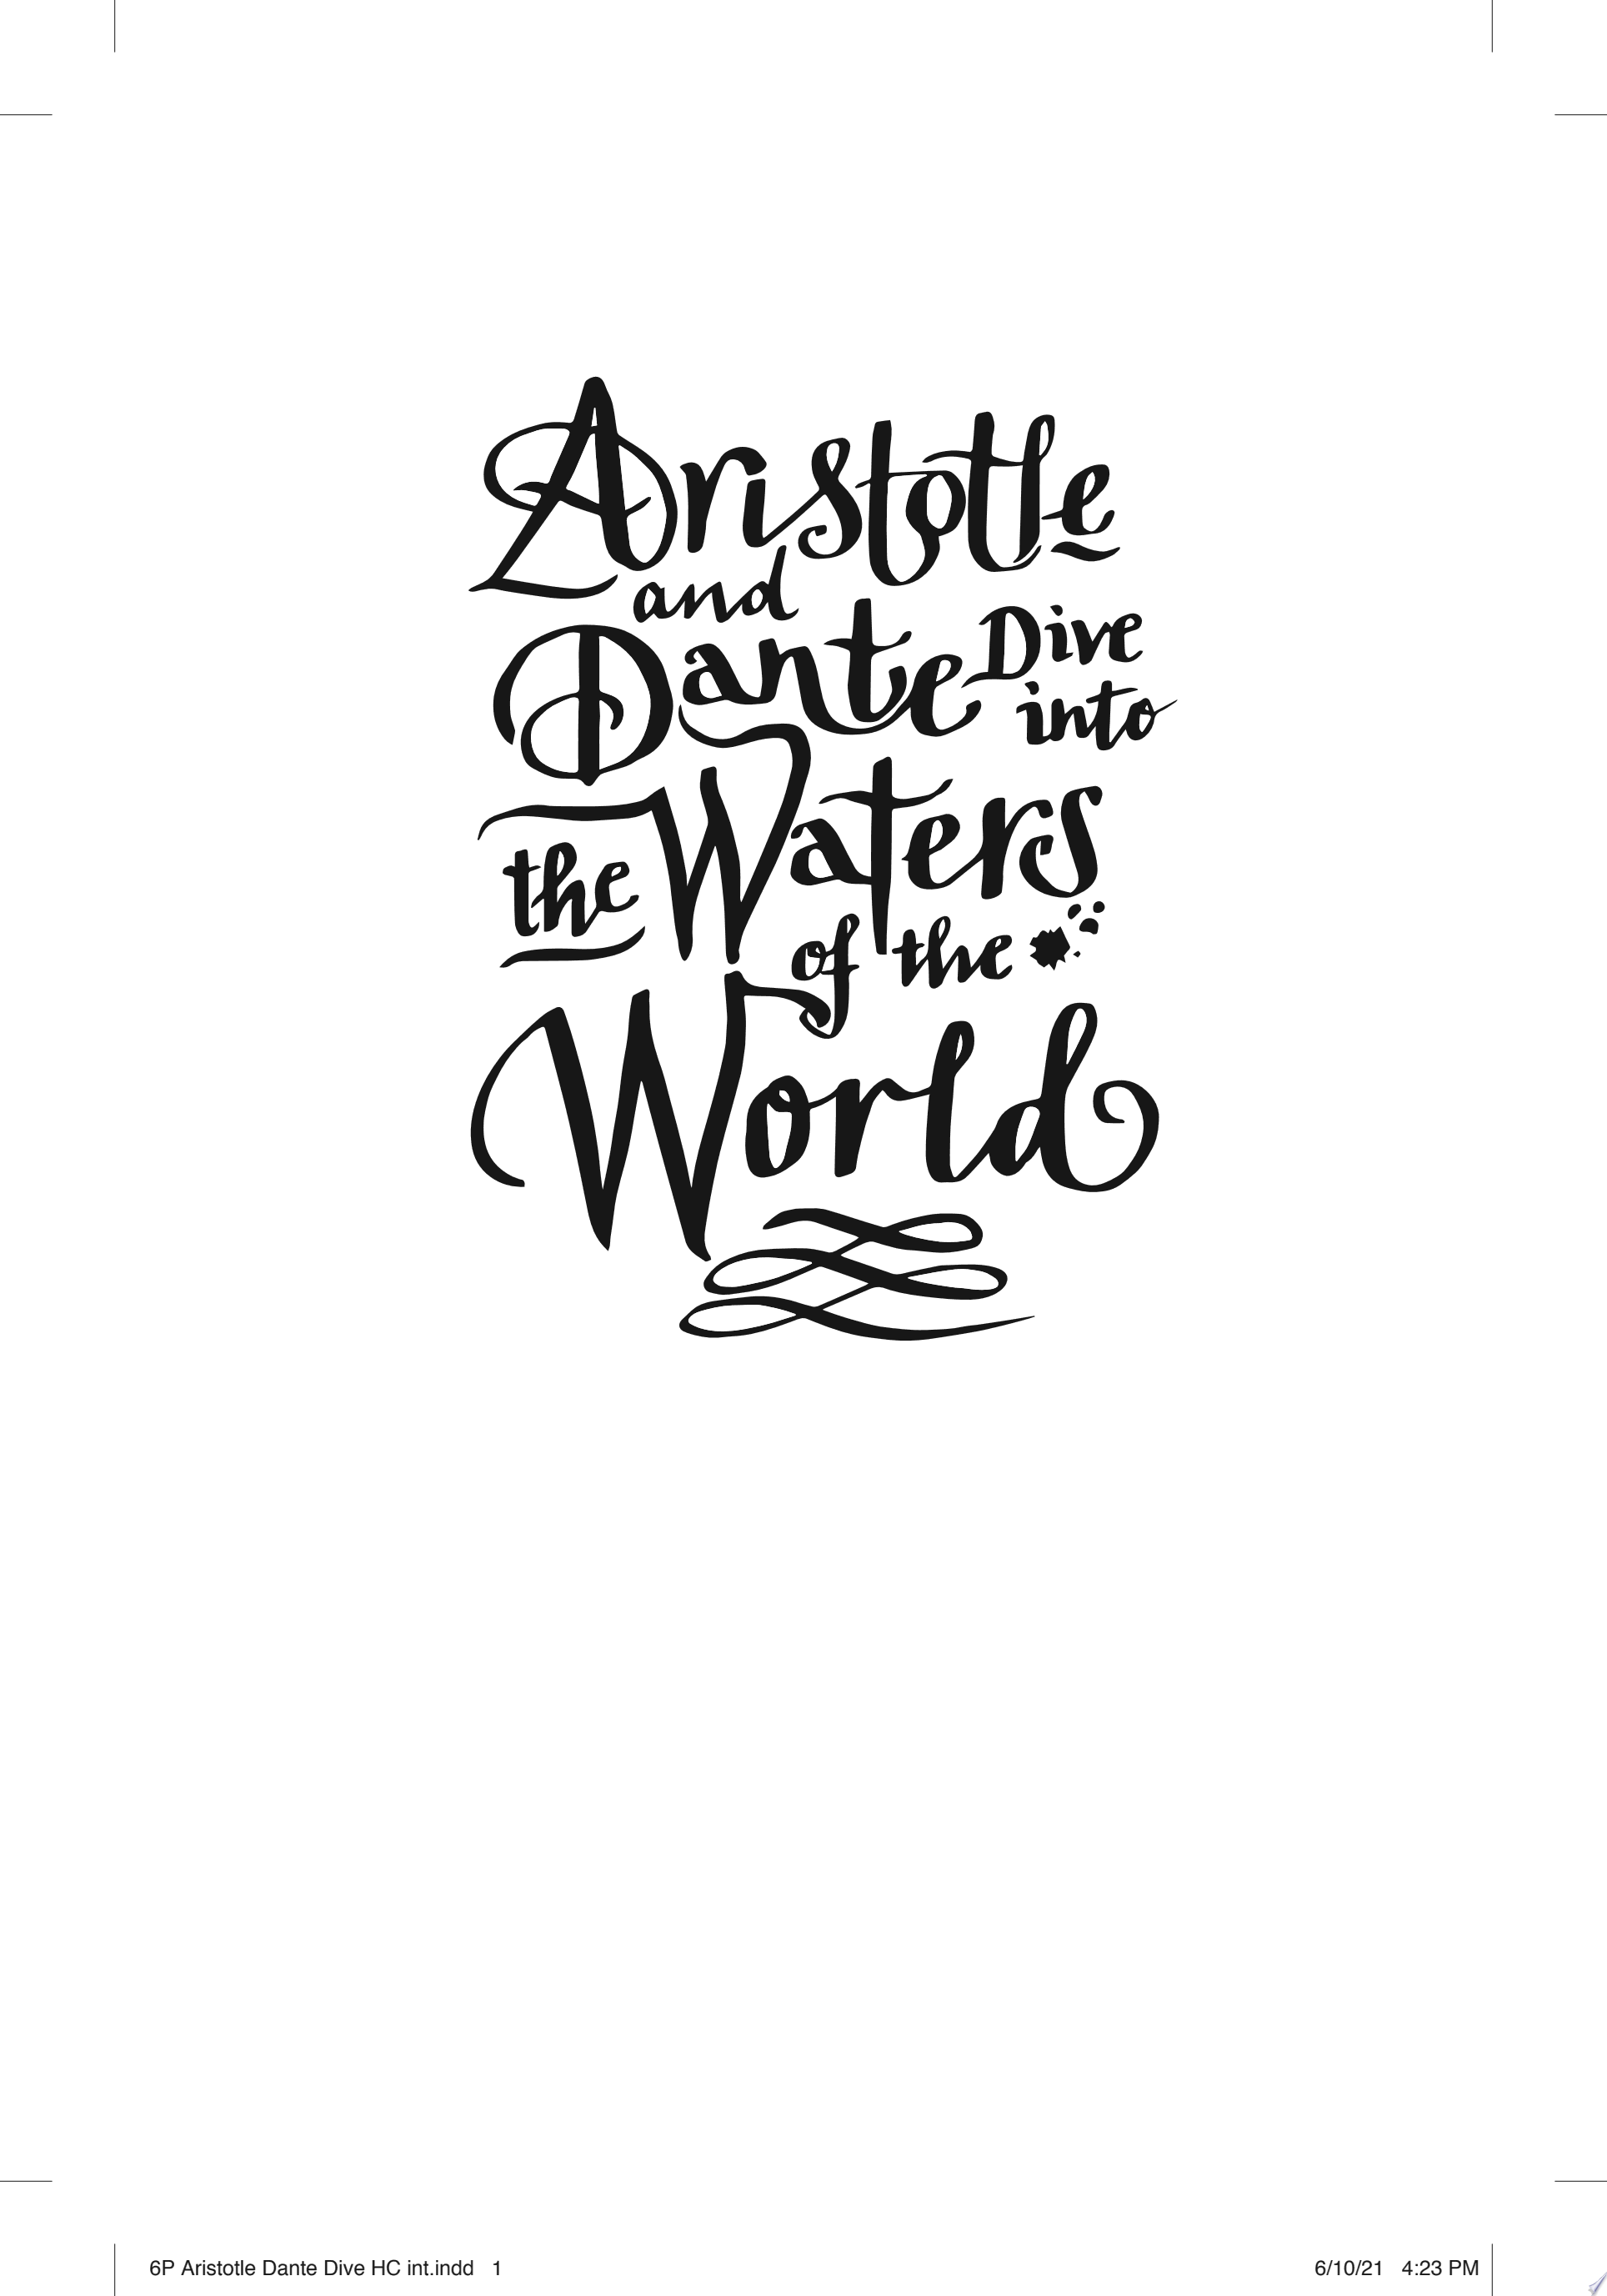 Image for "Aristotle and Dante Dive Into the Waters of the World"